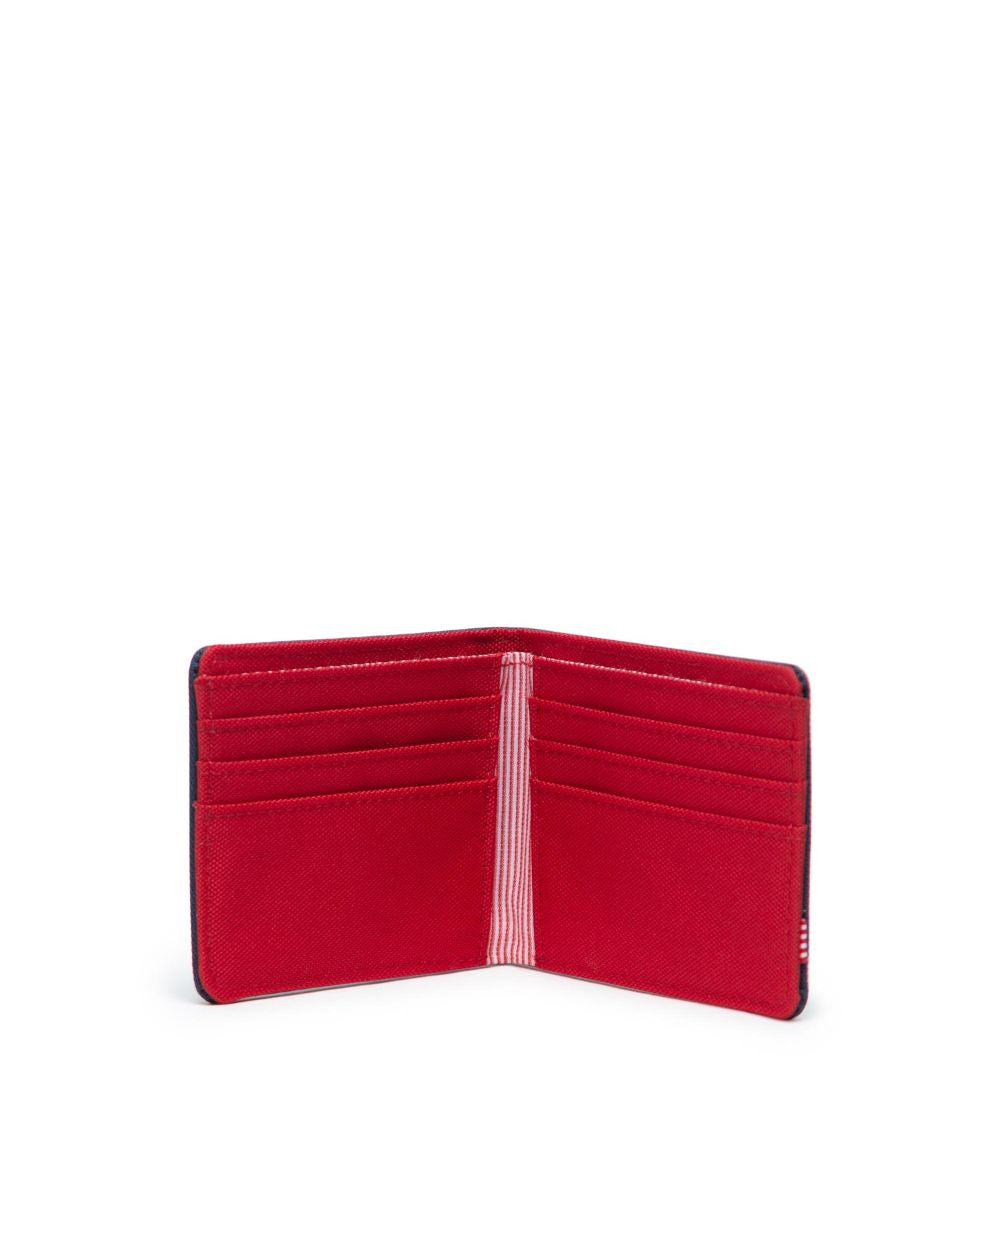 Roy Wallet - Navy/Red